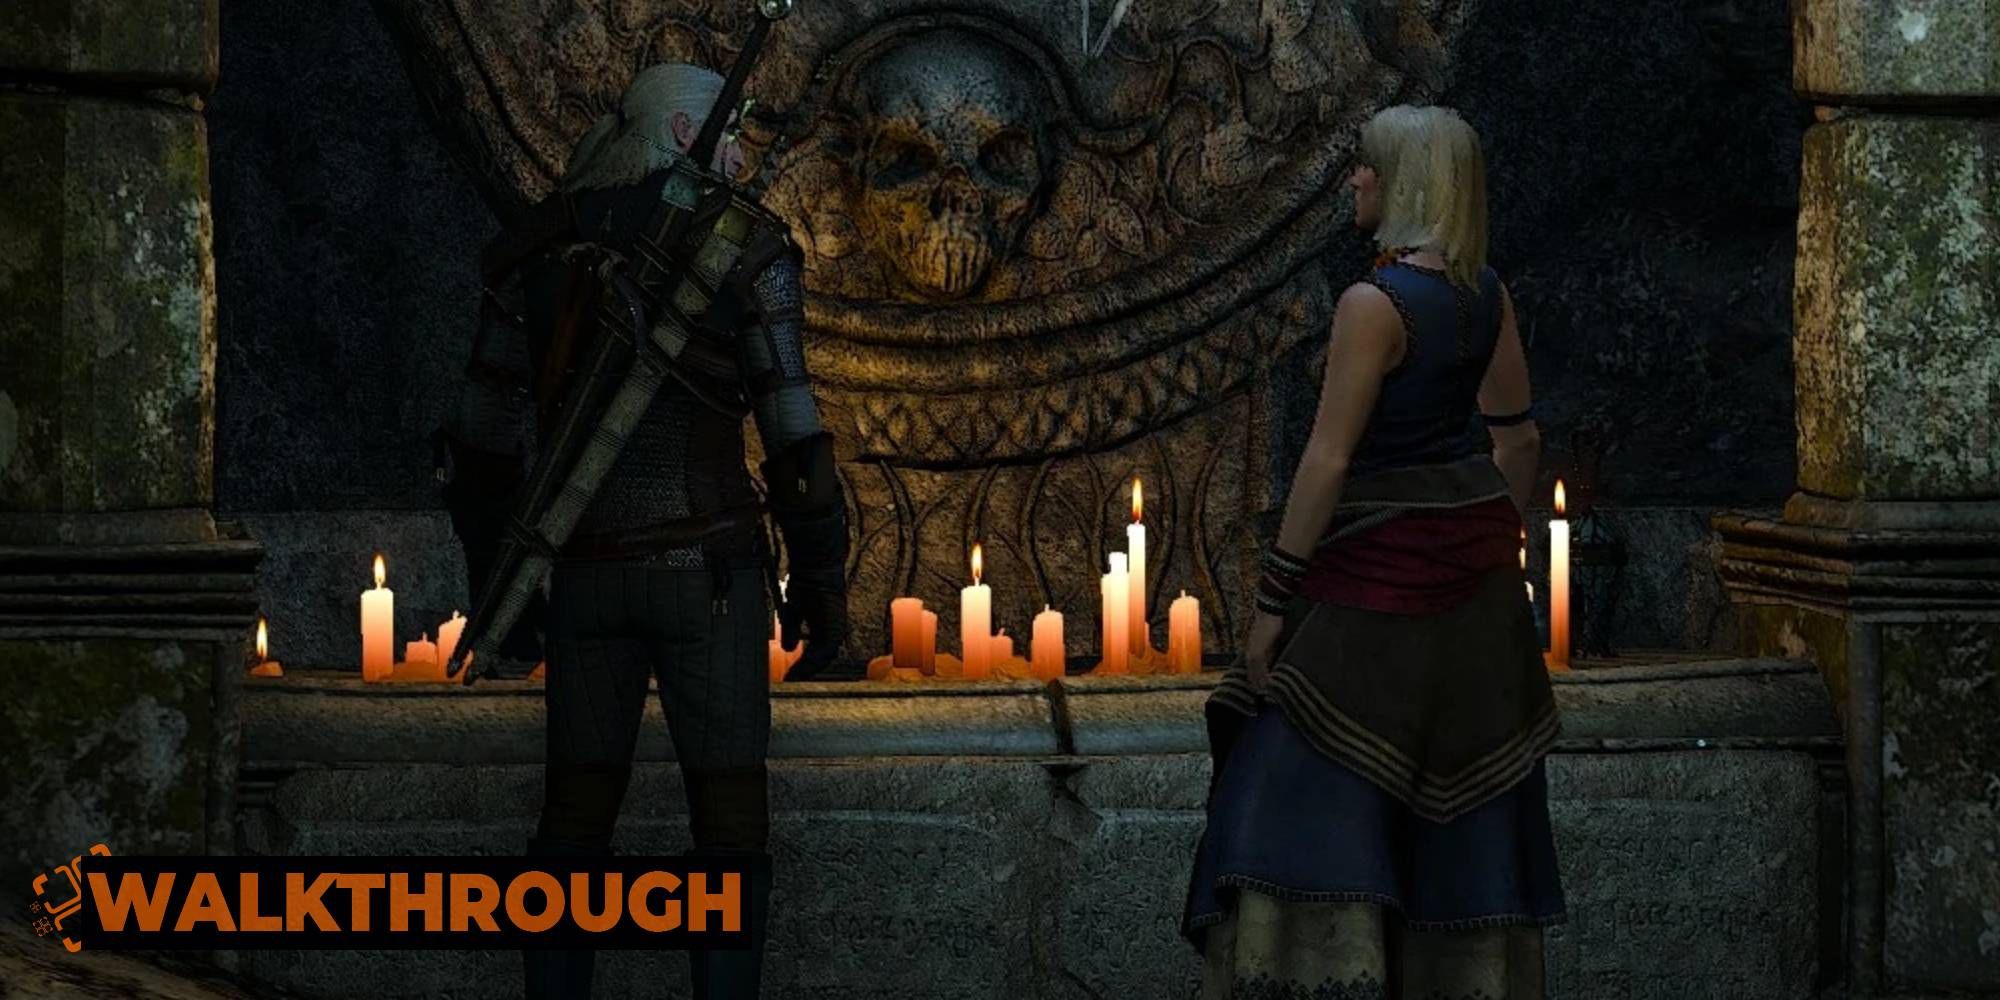 kandidat Hele tiden Uberettiget How To Complete The Magic Lamp Quest In The Witcher 3